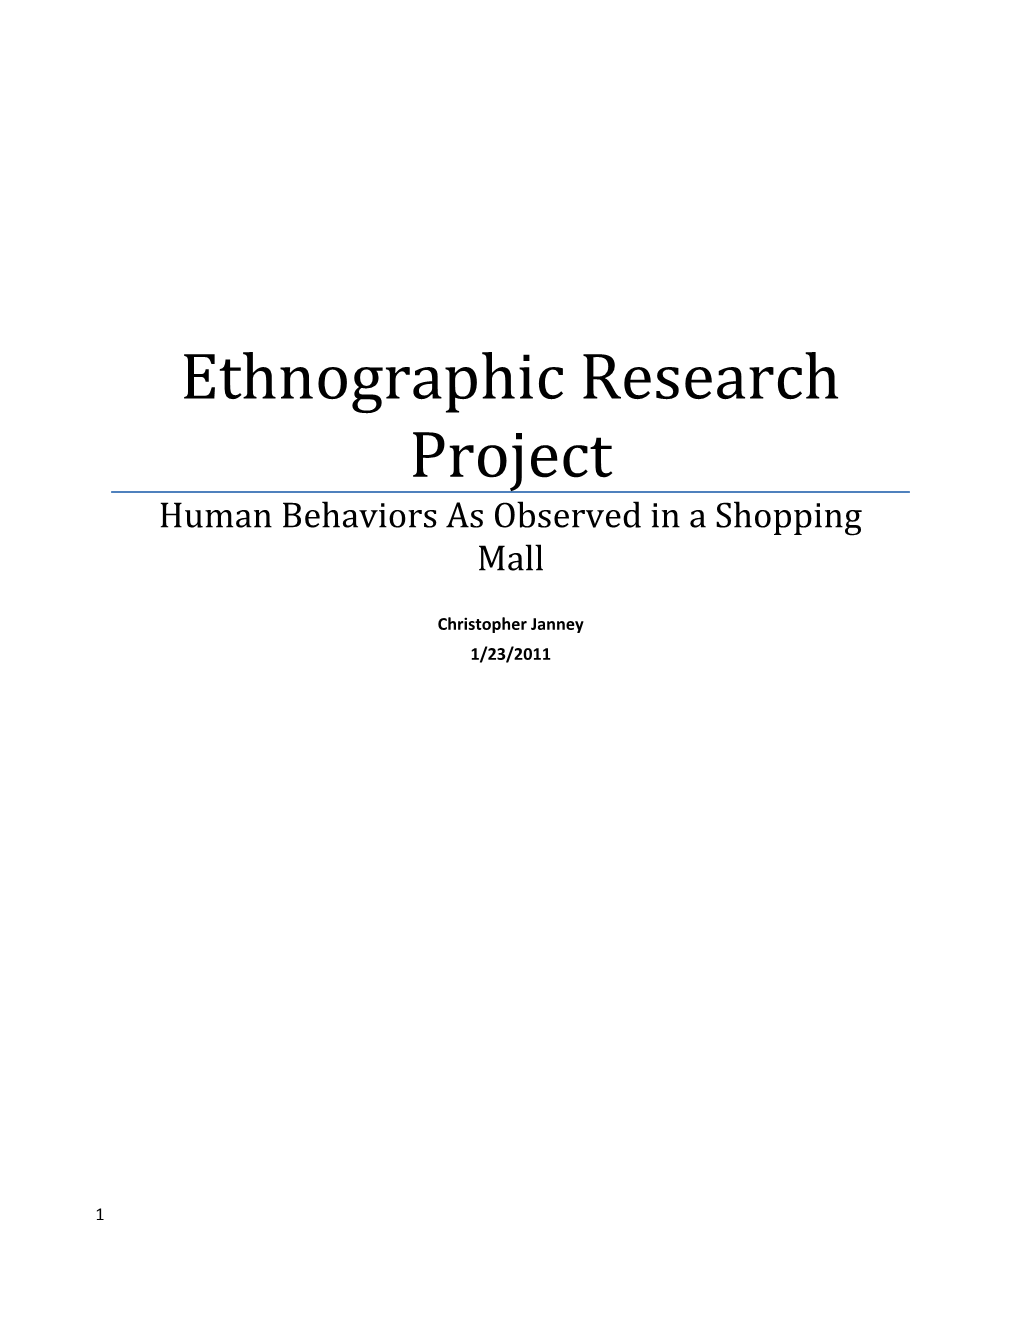 Ethnographic Research Project